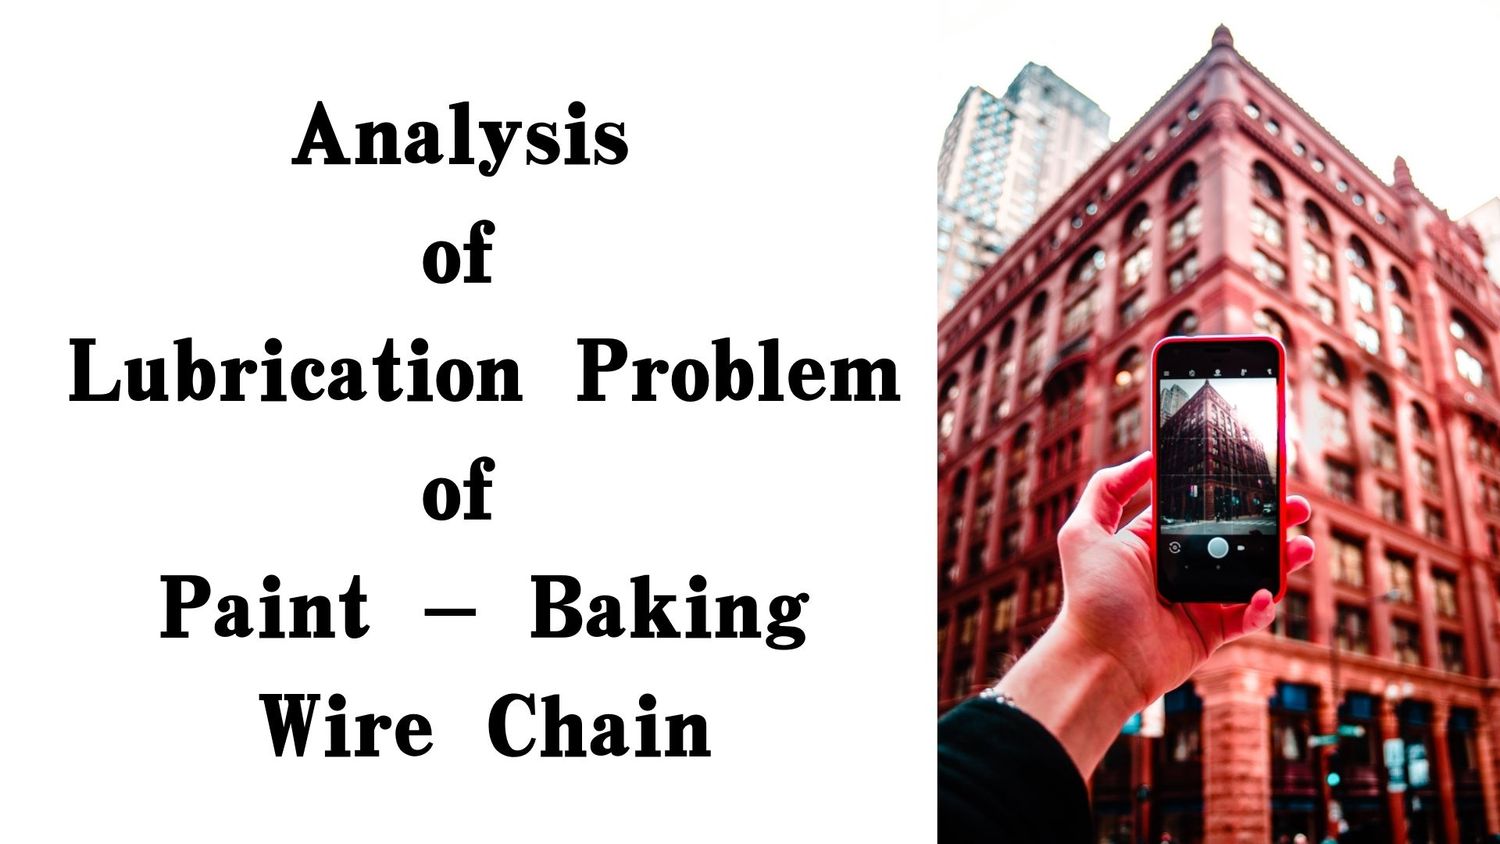 Analysis of lubrication problem of paint - baking wire chain.jpg